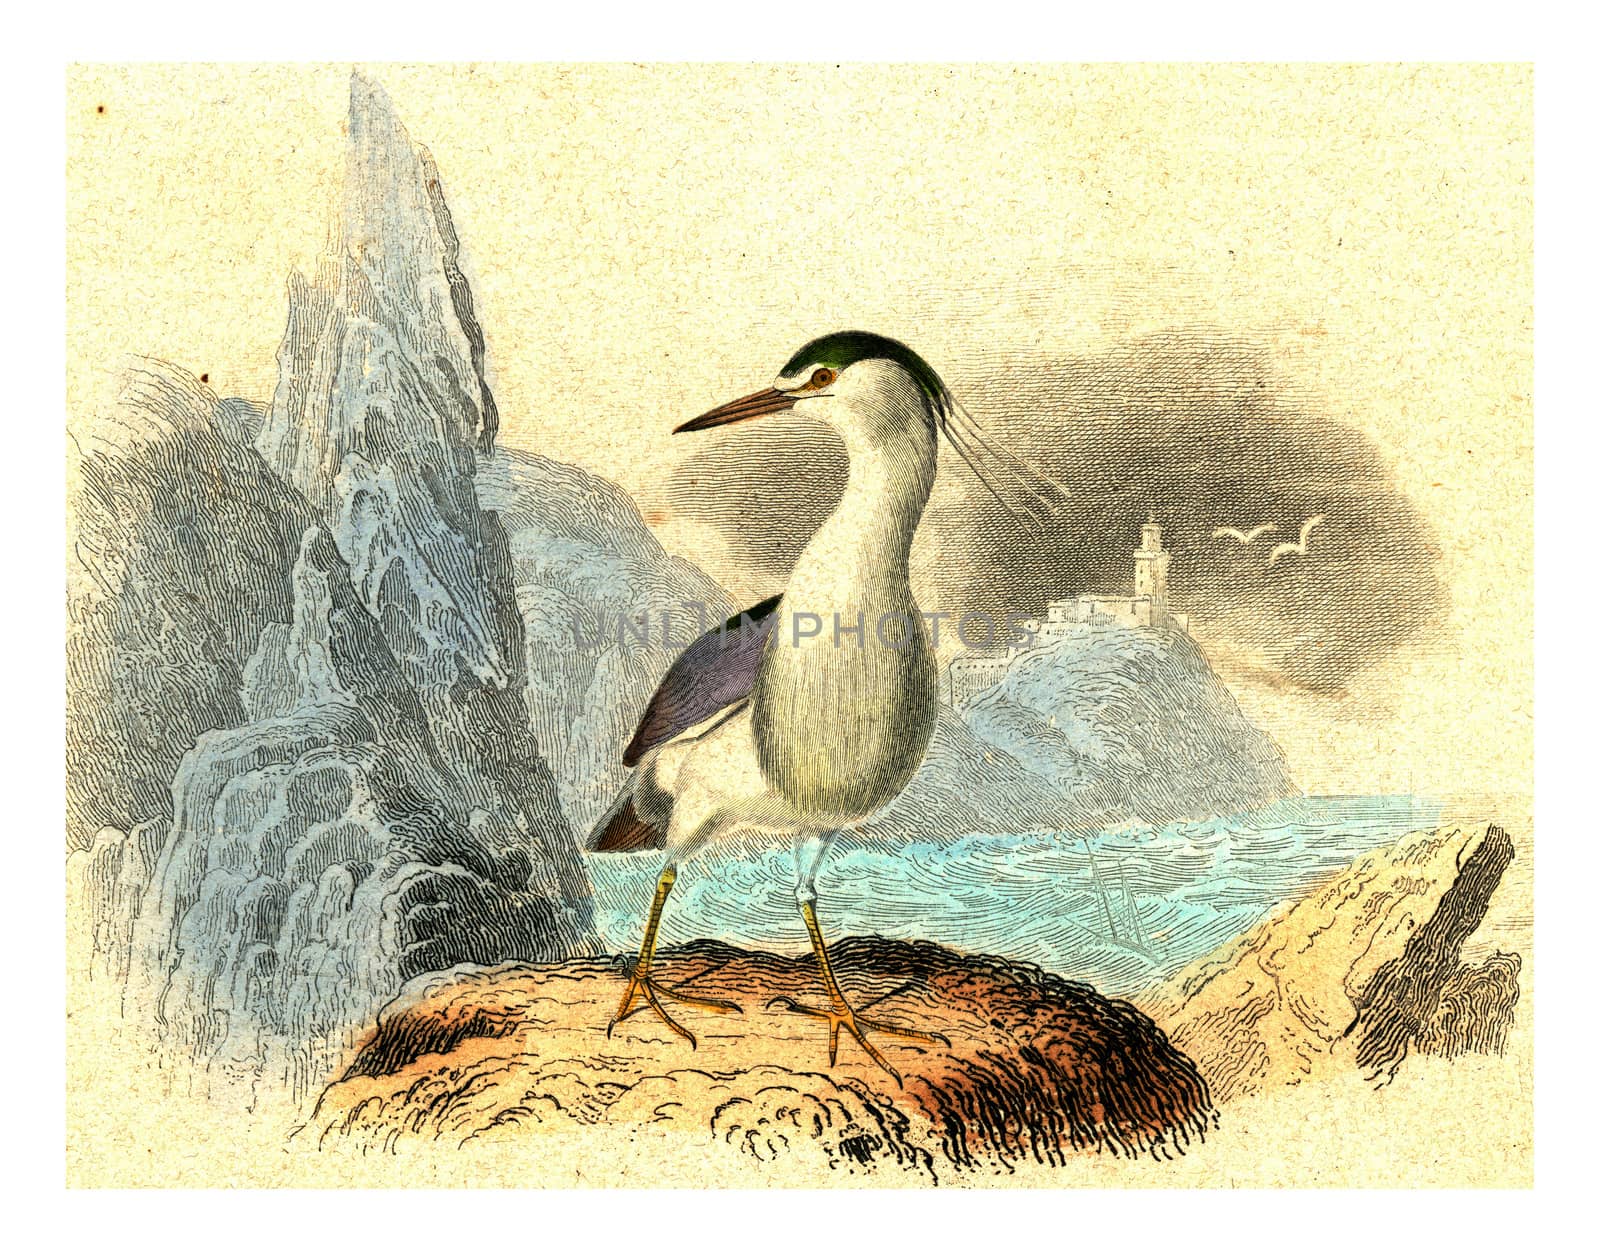 The Night Heron, vintage engraved illustration. From Buffon Complete Work.
